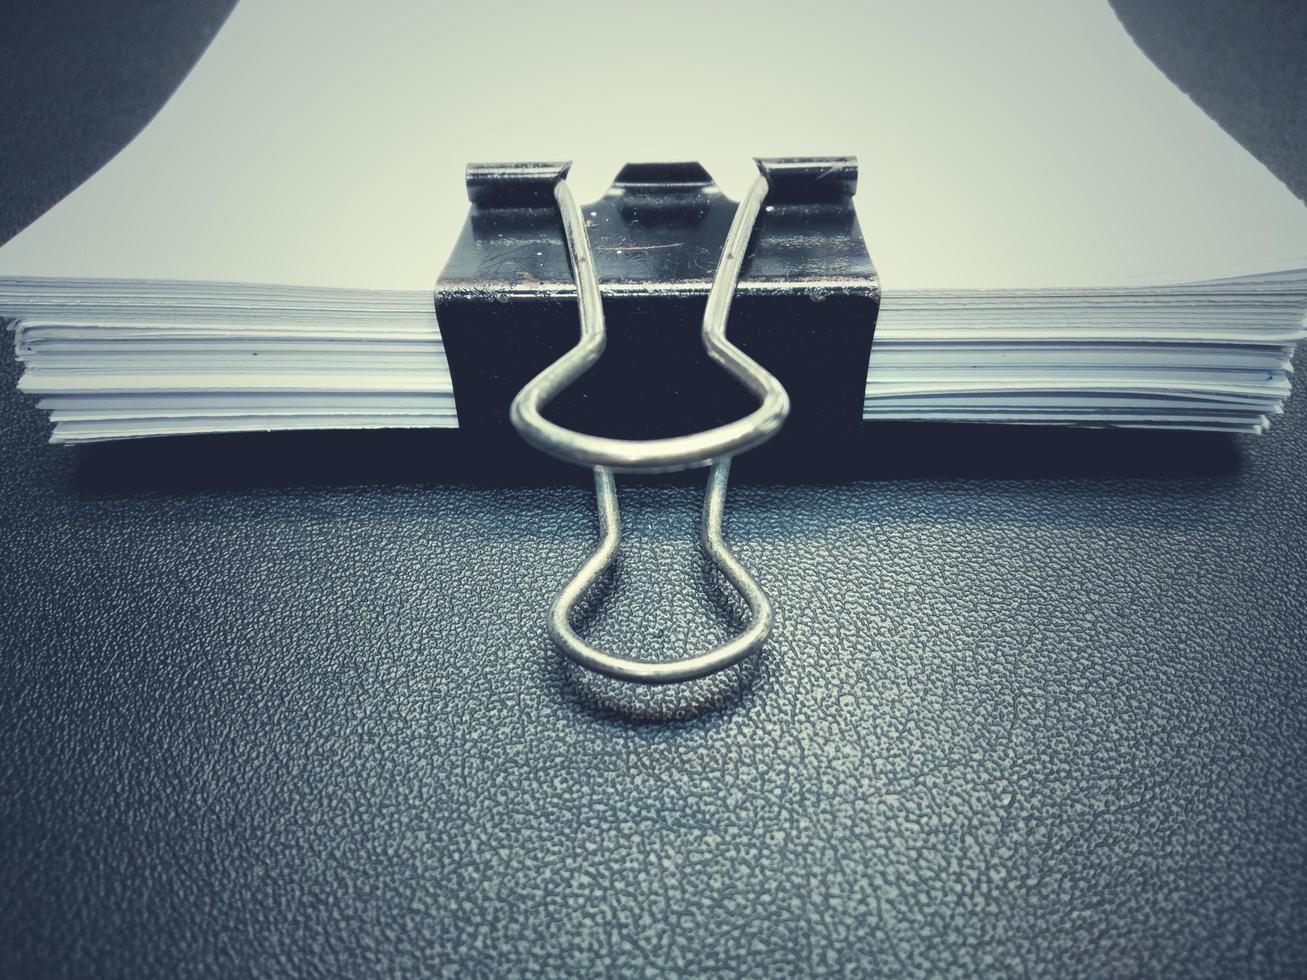 The black clip, white paper clip. Placed on a black surface with dark edges of the desk. photo